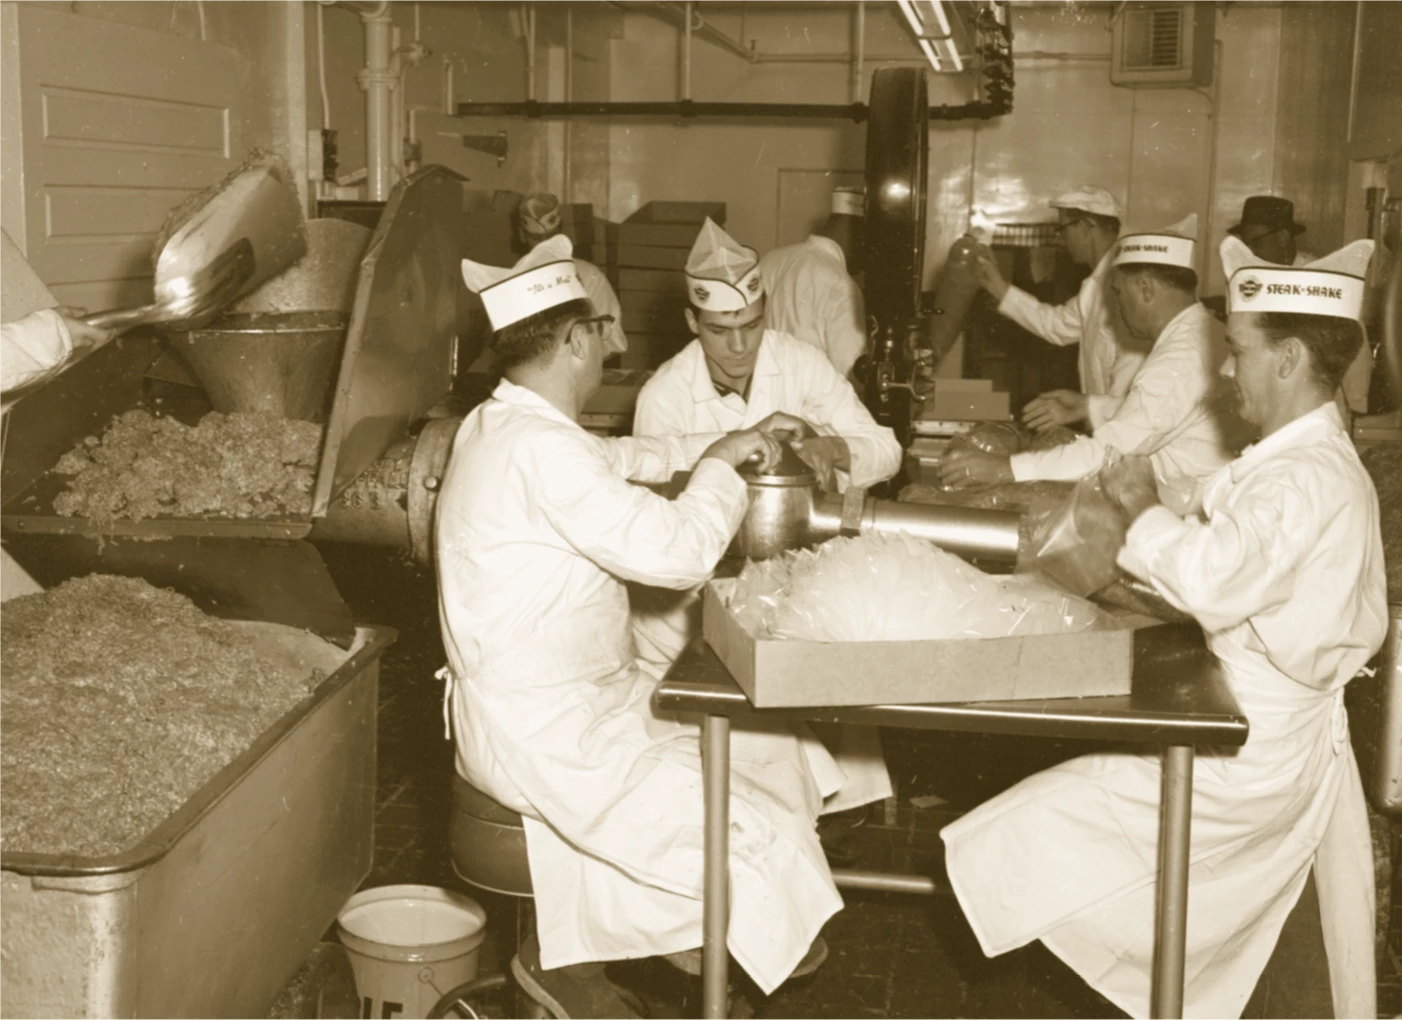 7 people are in a room with industrial equipment and stainless steel tables. In the foreground there are 4 light-skinned men wearing white clothing and white aprons and it appears they are extruding meat into plastic bags. They are all wearing paper hats with the Steak n Shake logo and name. On the left side of the image are two huge containers filled with ground beef. You can see a shovel actively pouring meat from one container to the next.